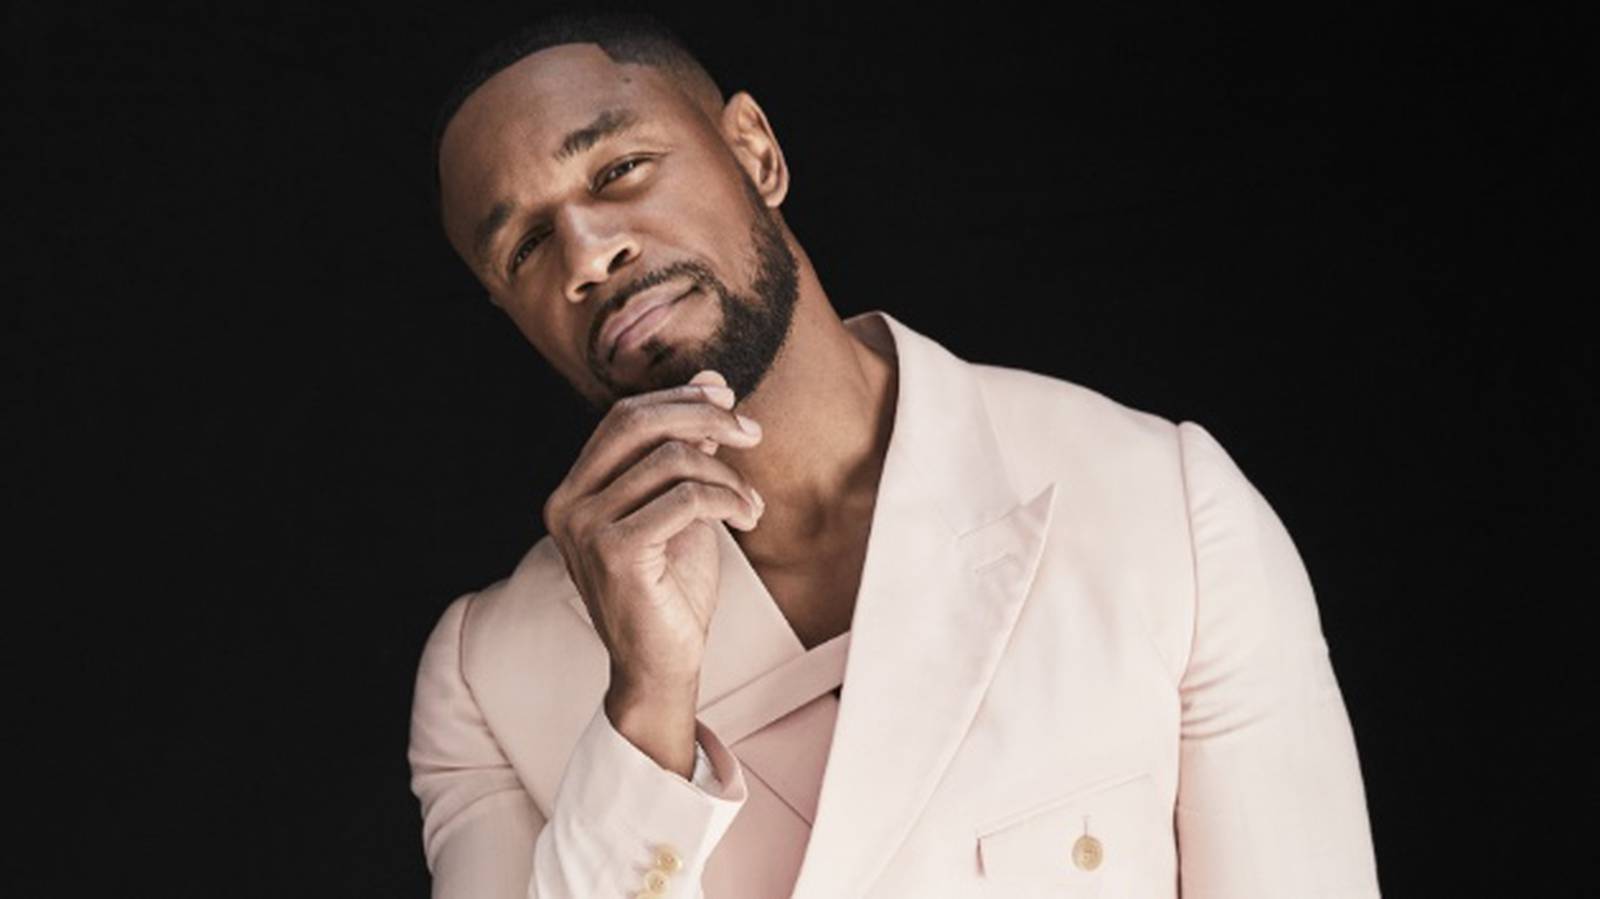 Tank reflects on the connection between new music and his 2001 single